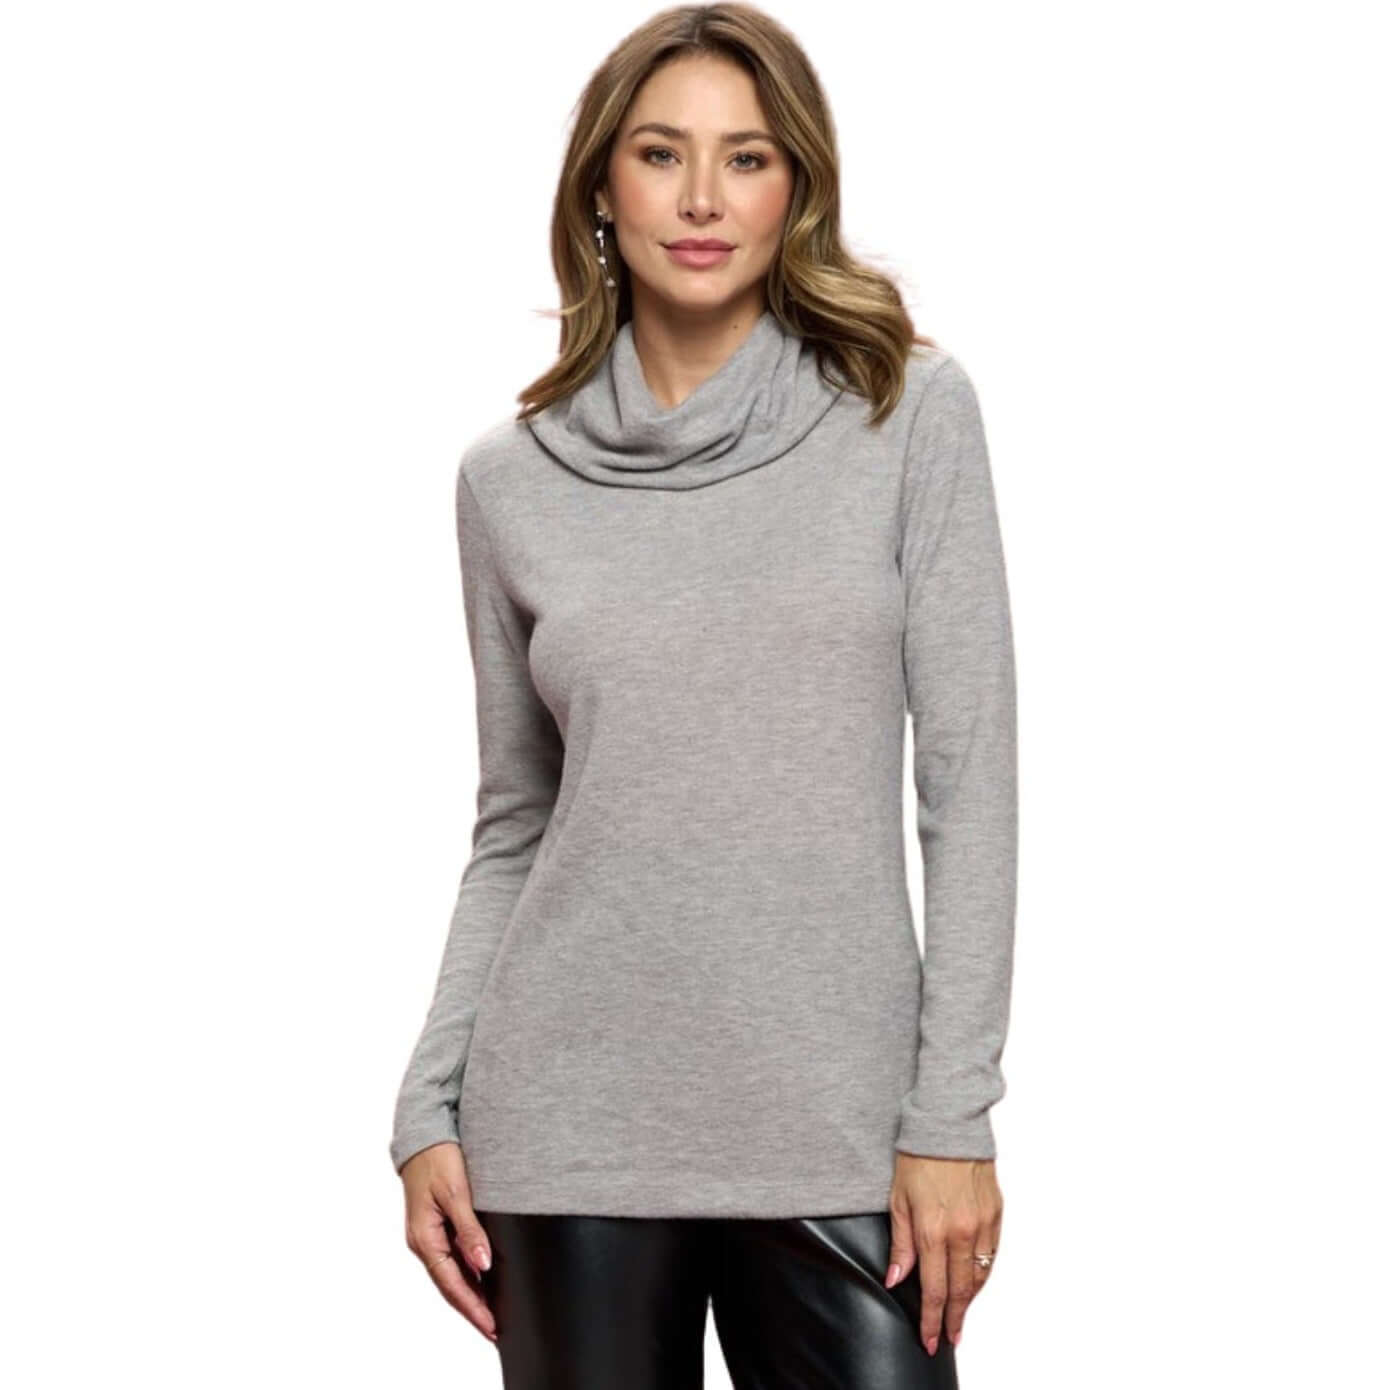 Made in USA Ladies' Super Soft Long Sleeve Cowl Turtle Neck Cashmere Feel Sweater Top in Heather Grey | Renee C Style# 4134TP